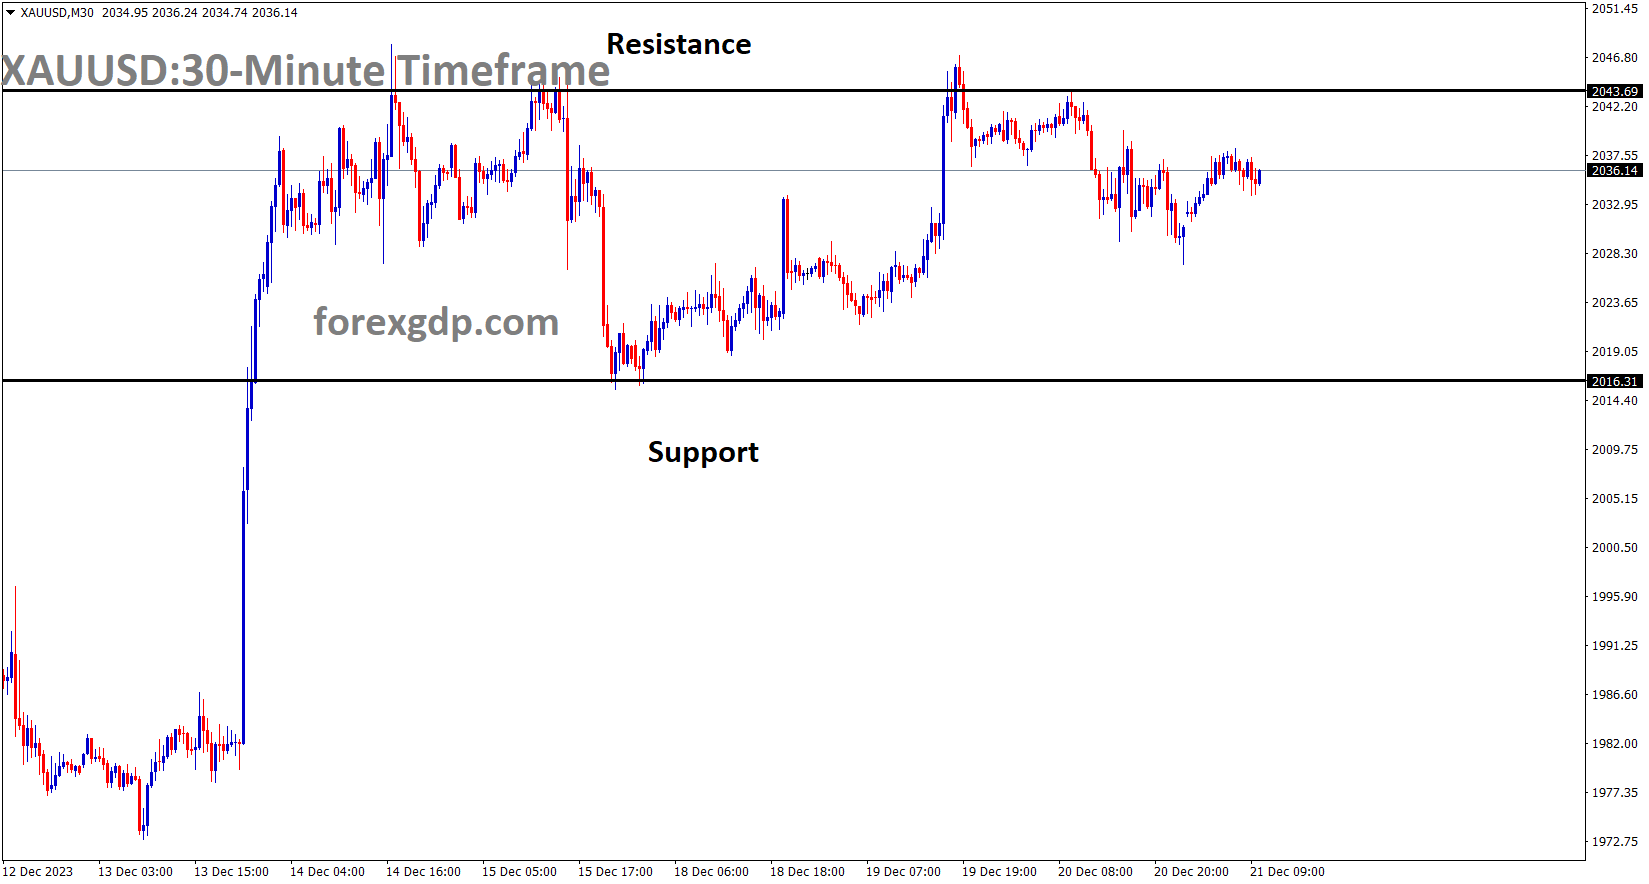 XAUUSD Gold price is moving in the Box pattern and the market has fallen from the resistance area of the pattern